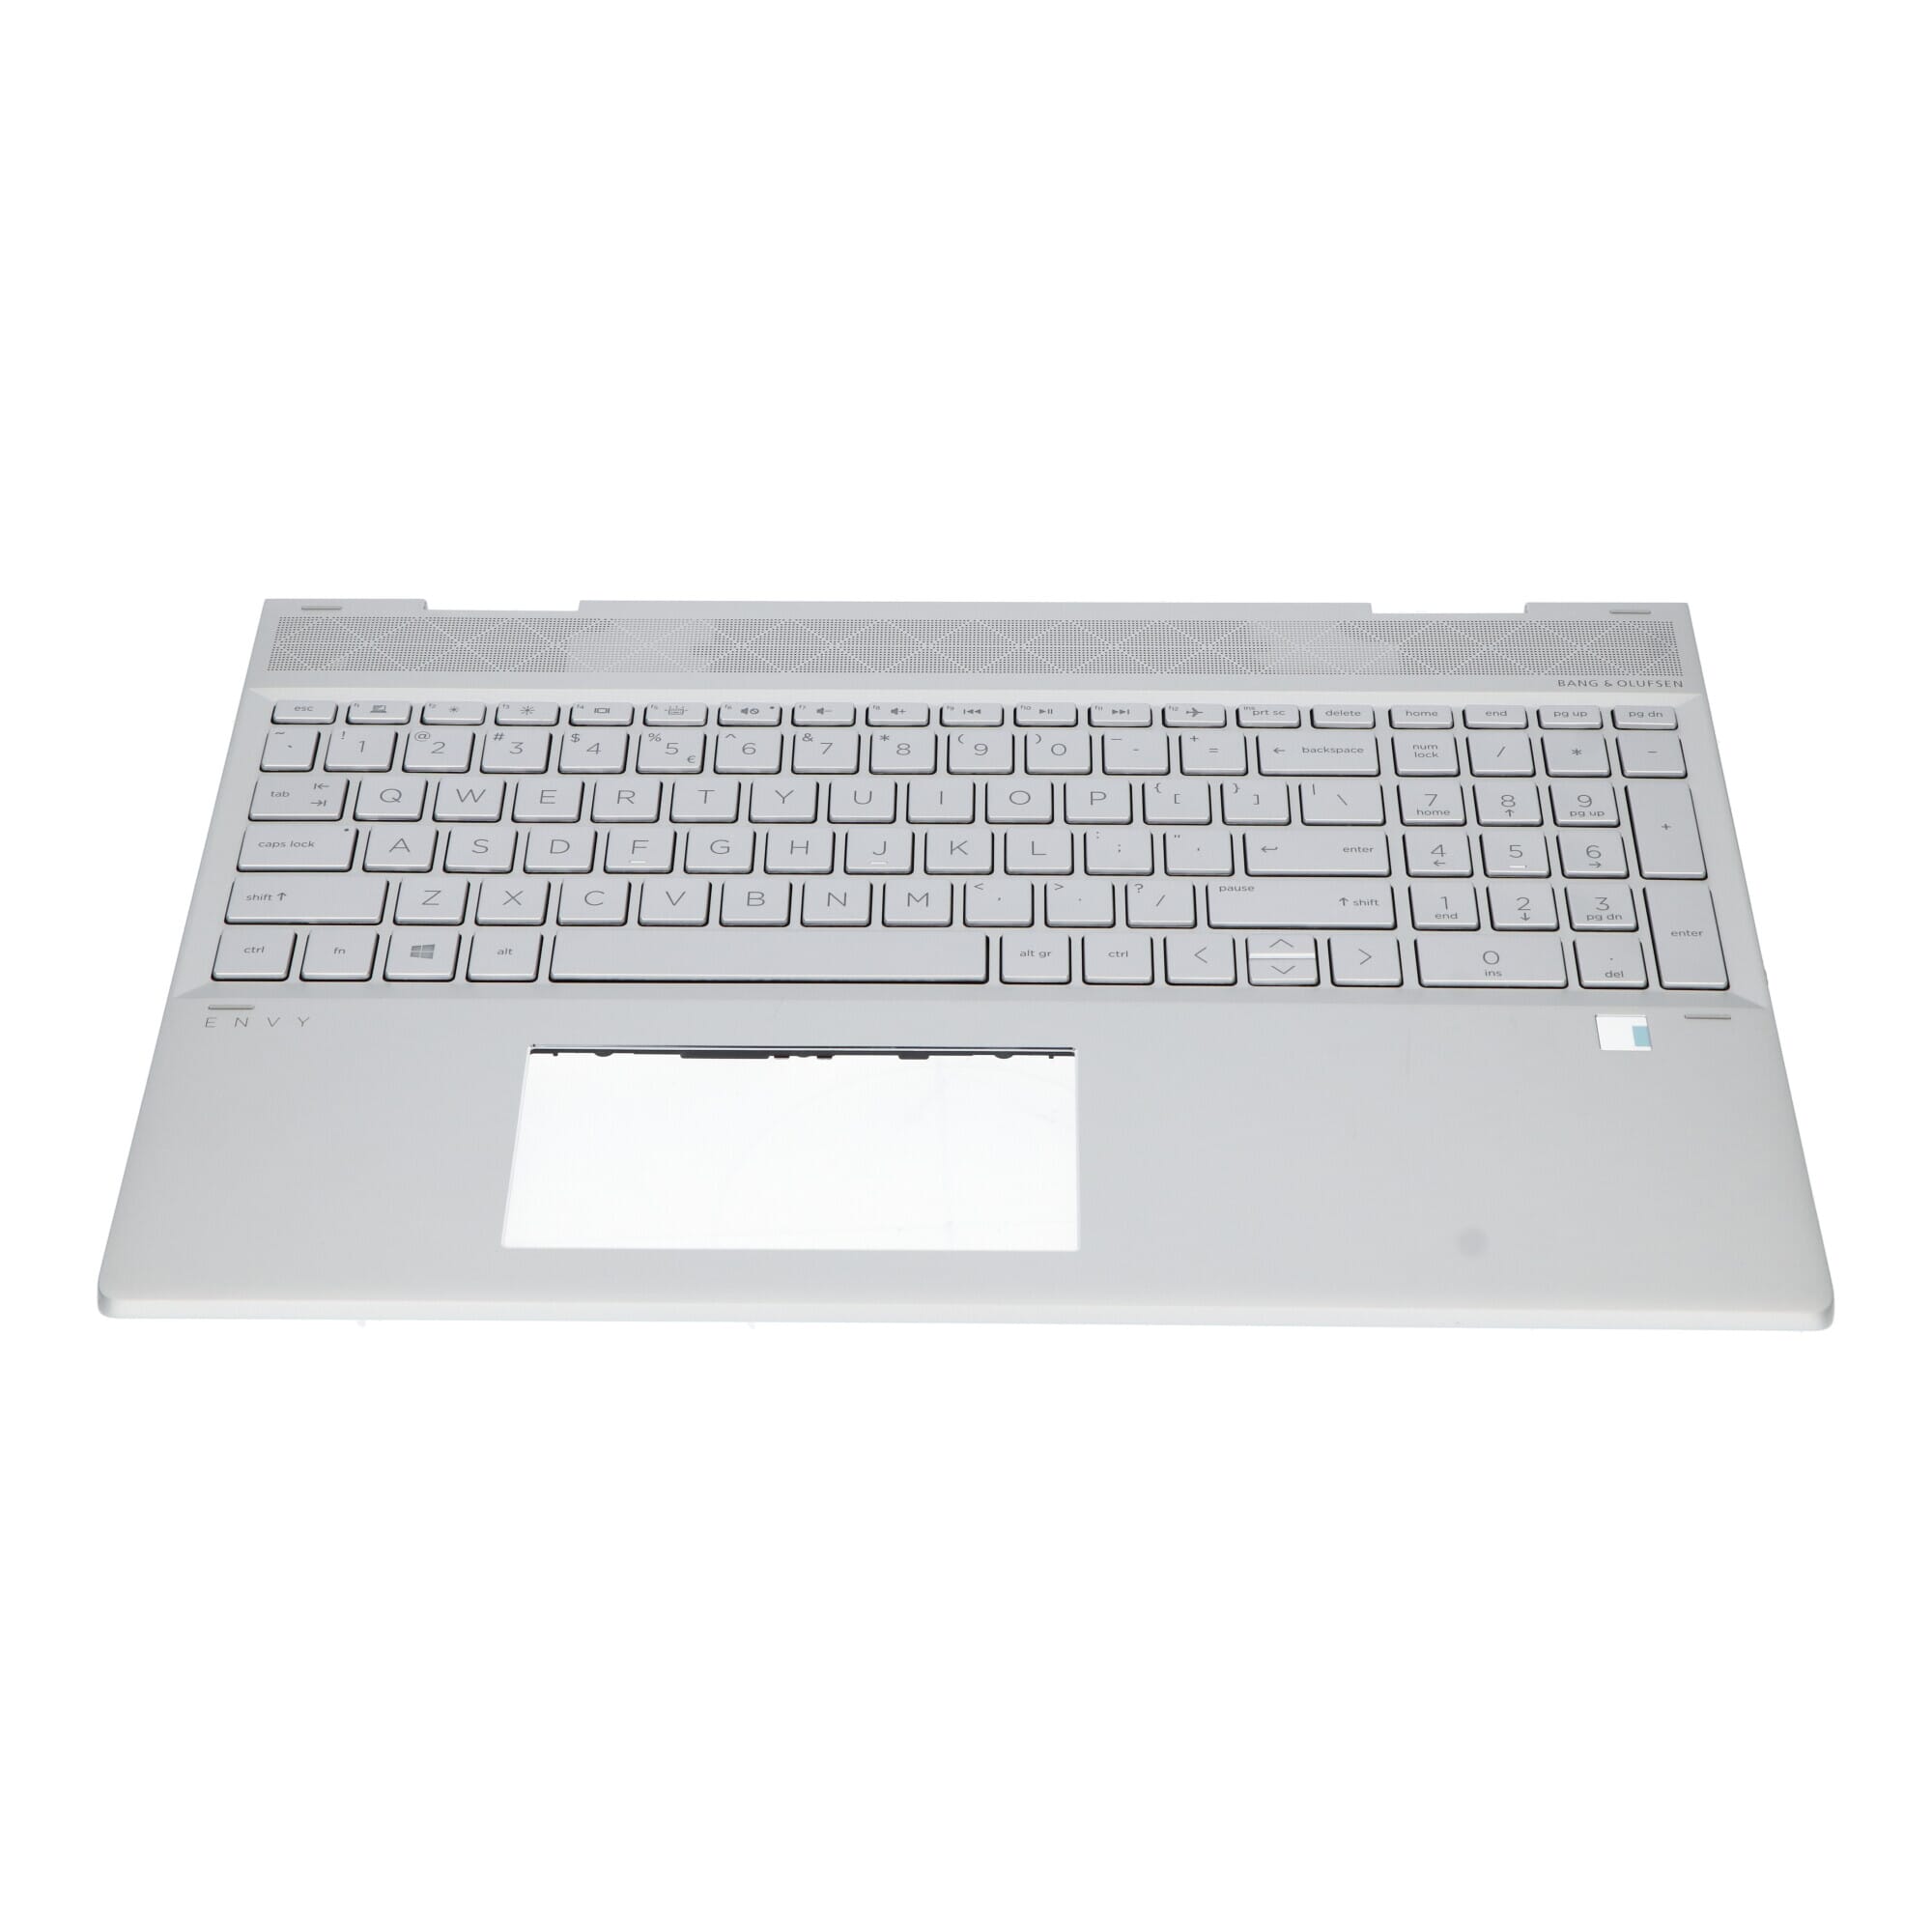 HP Laptop Toetsenbord Qwerty US + Top Cover Zilver